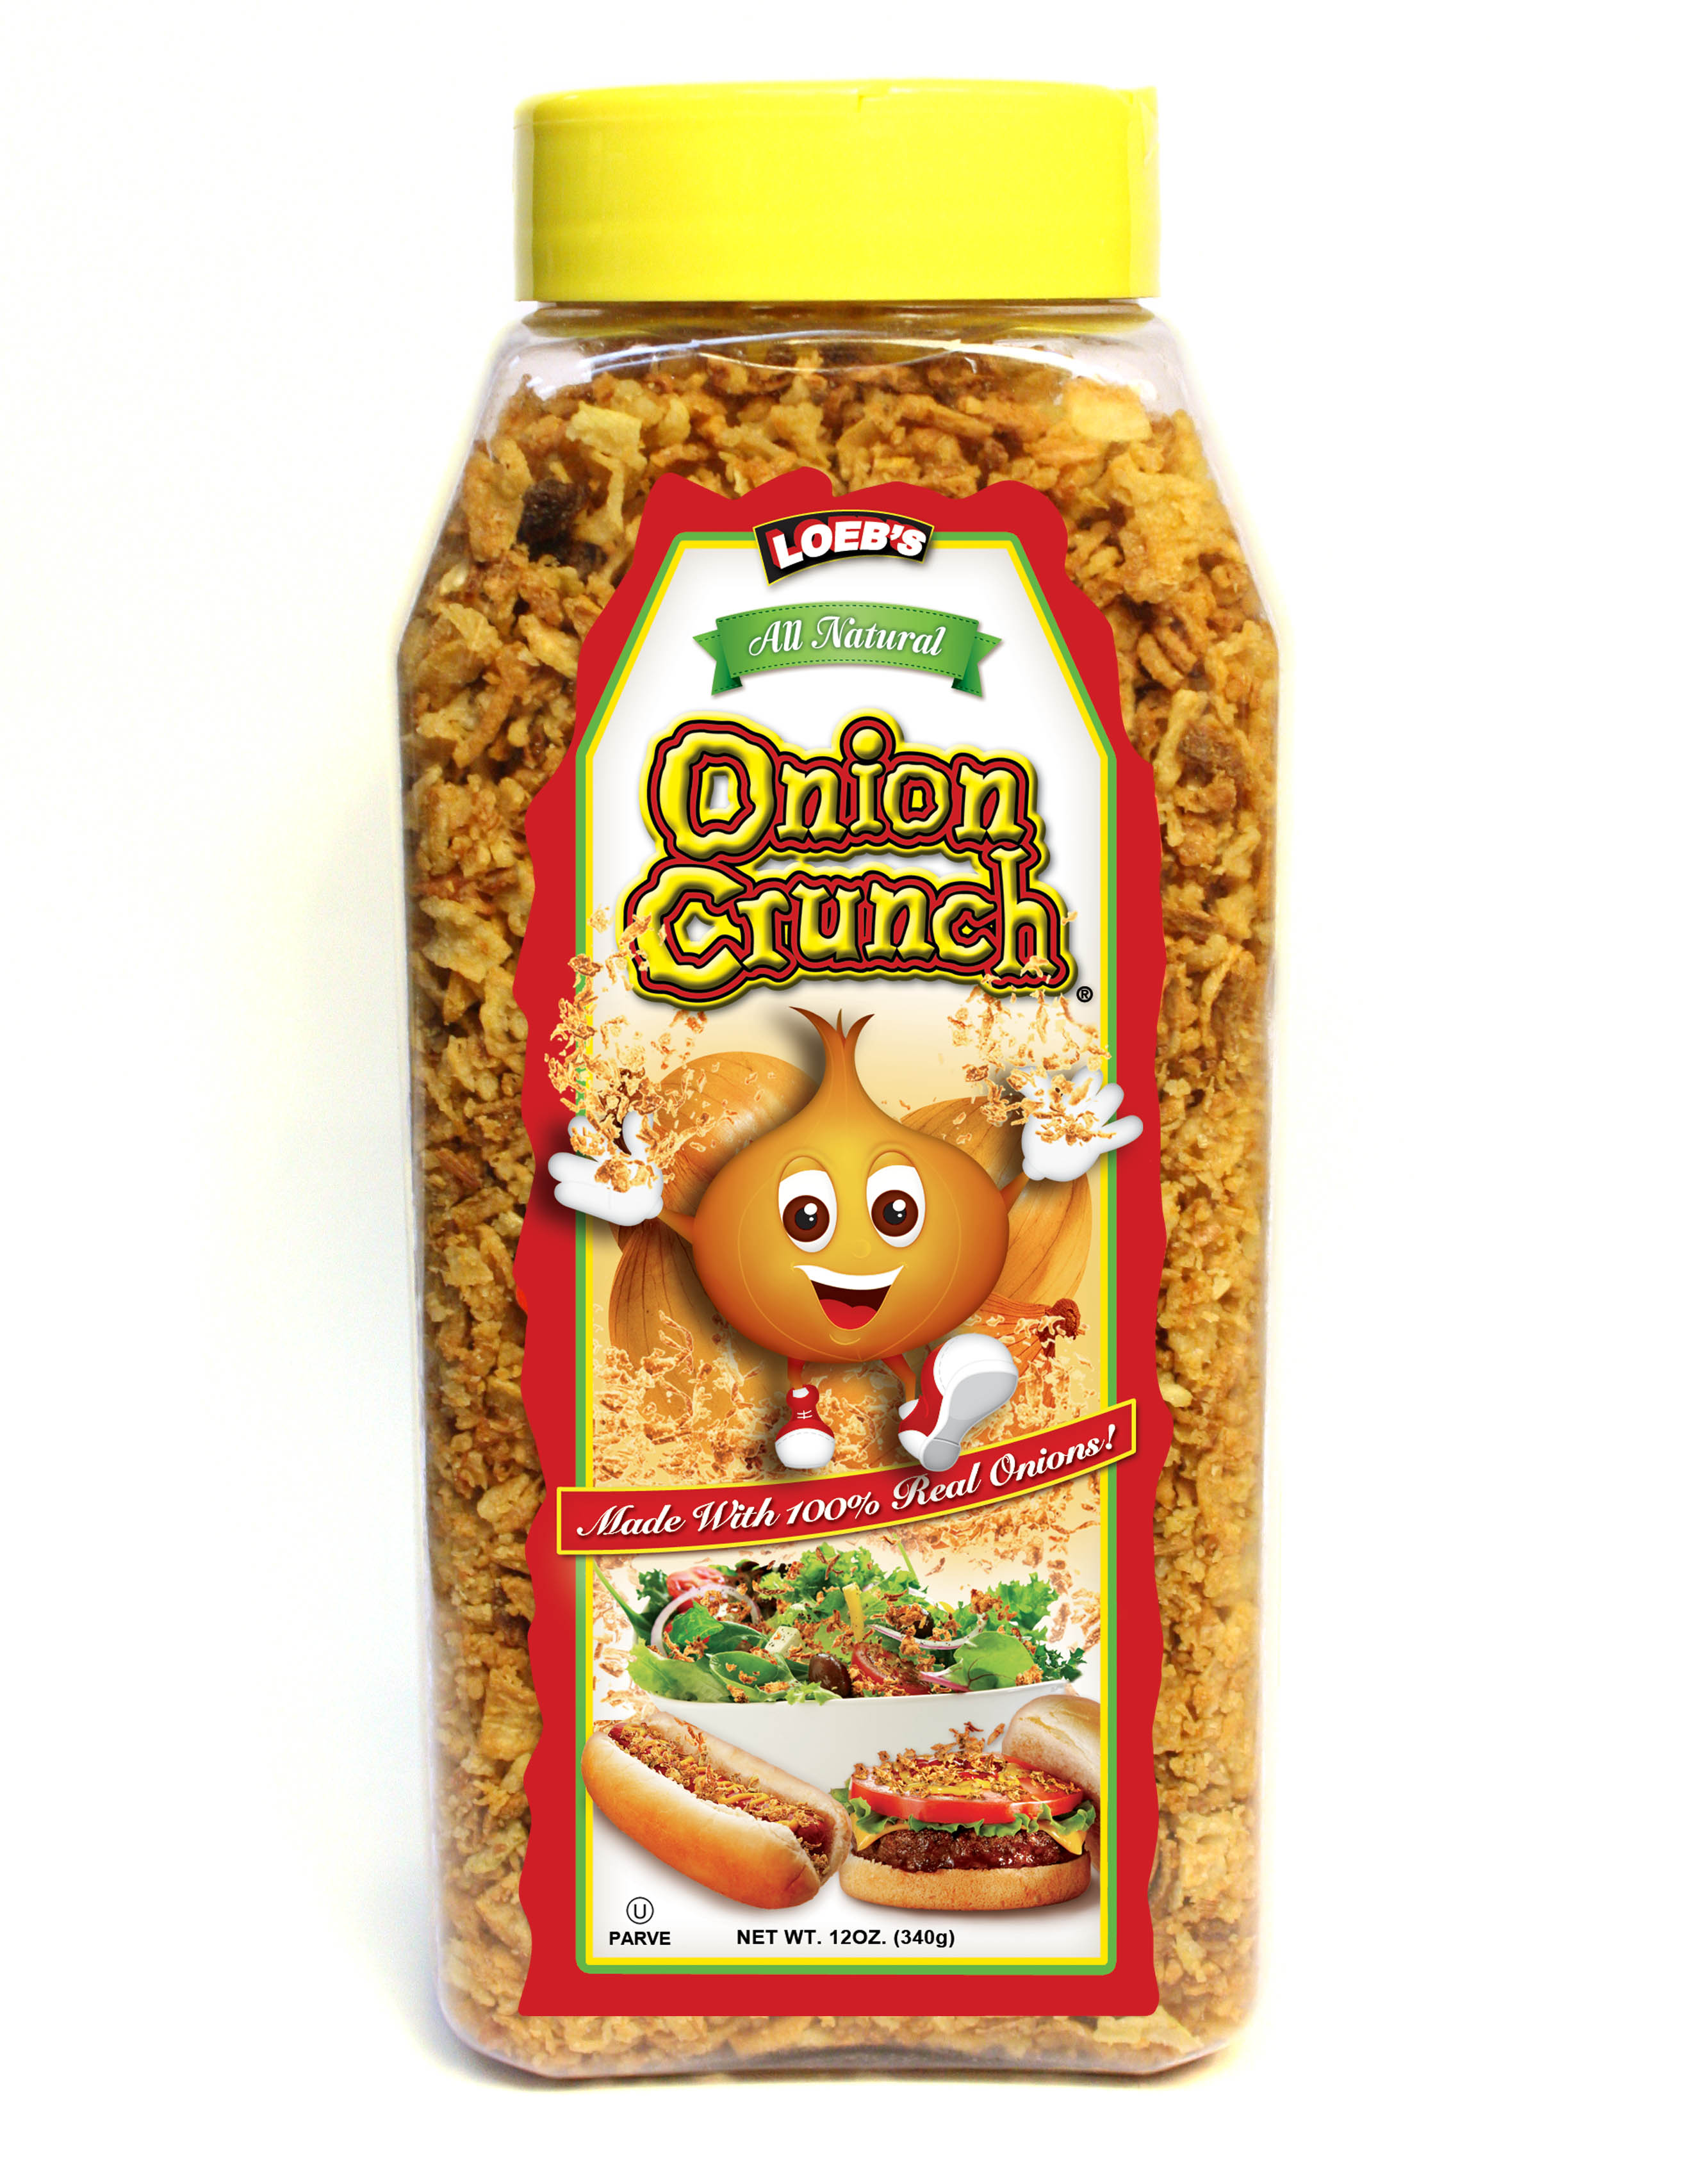 Food and Product Reviews - Onion Crunch - Food Blog | Bite of the Best